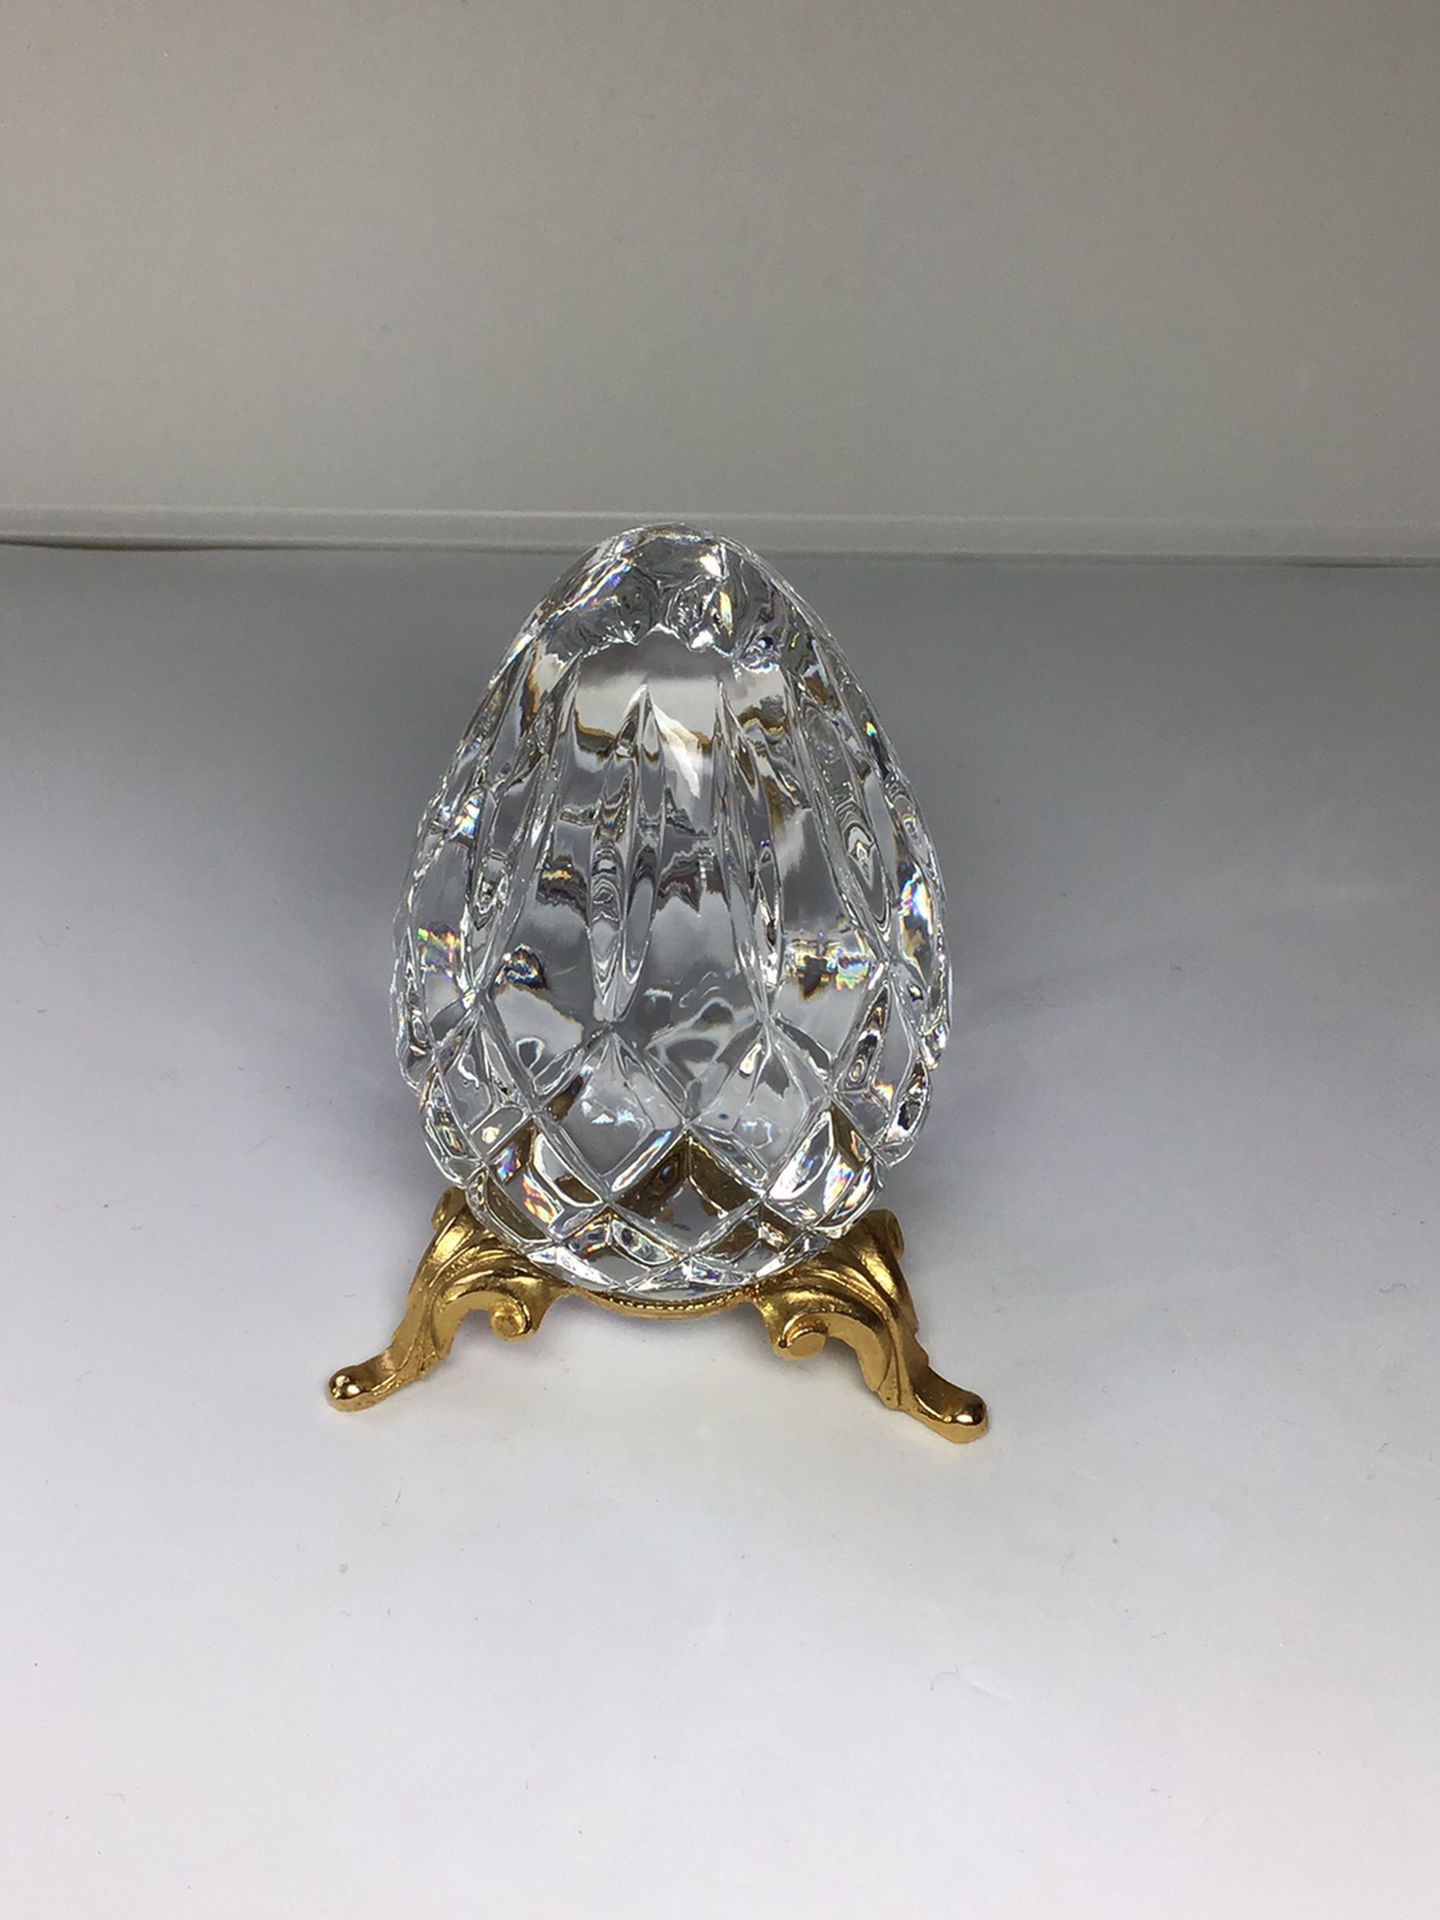 PENDING—Vintage Cut Crystal Egg With Stand